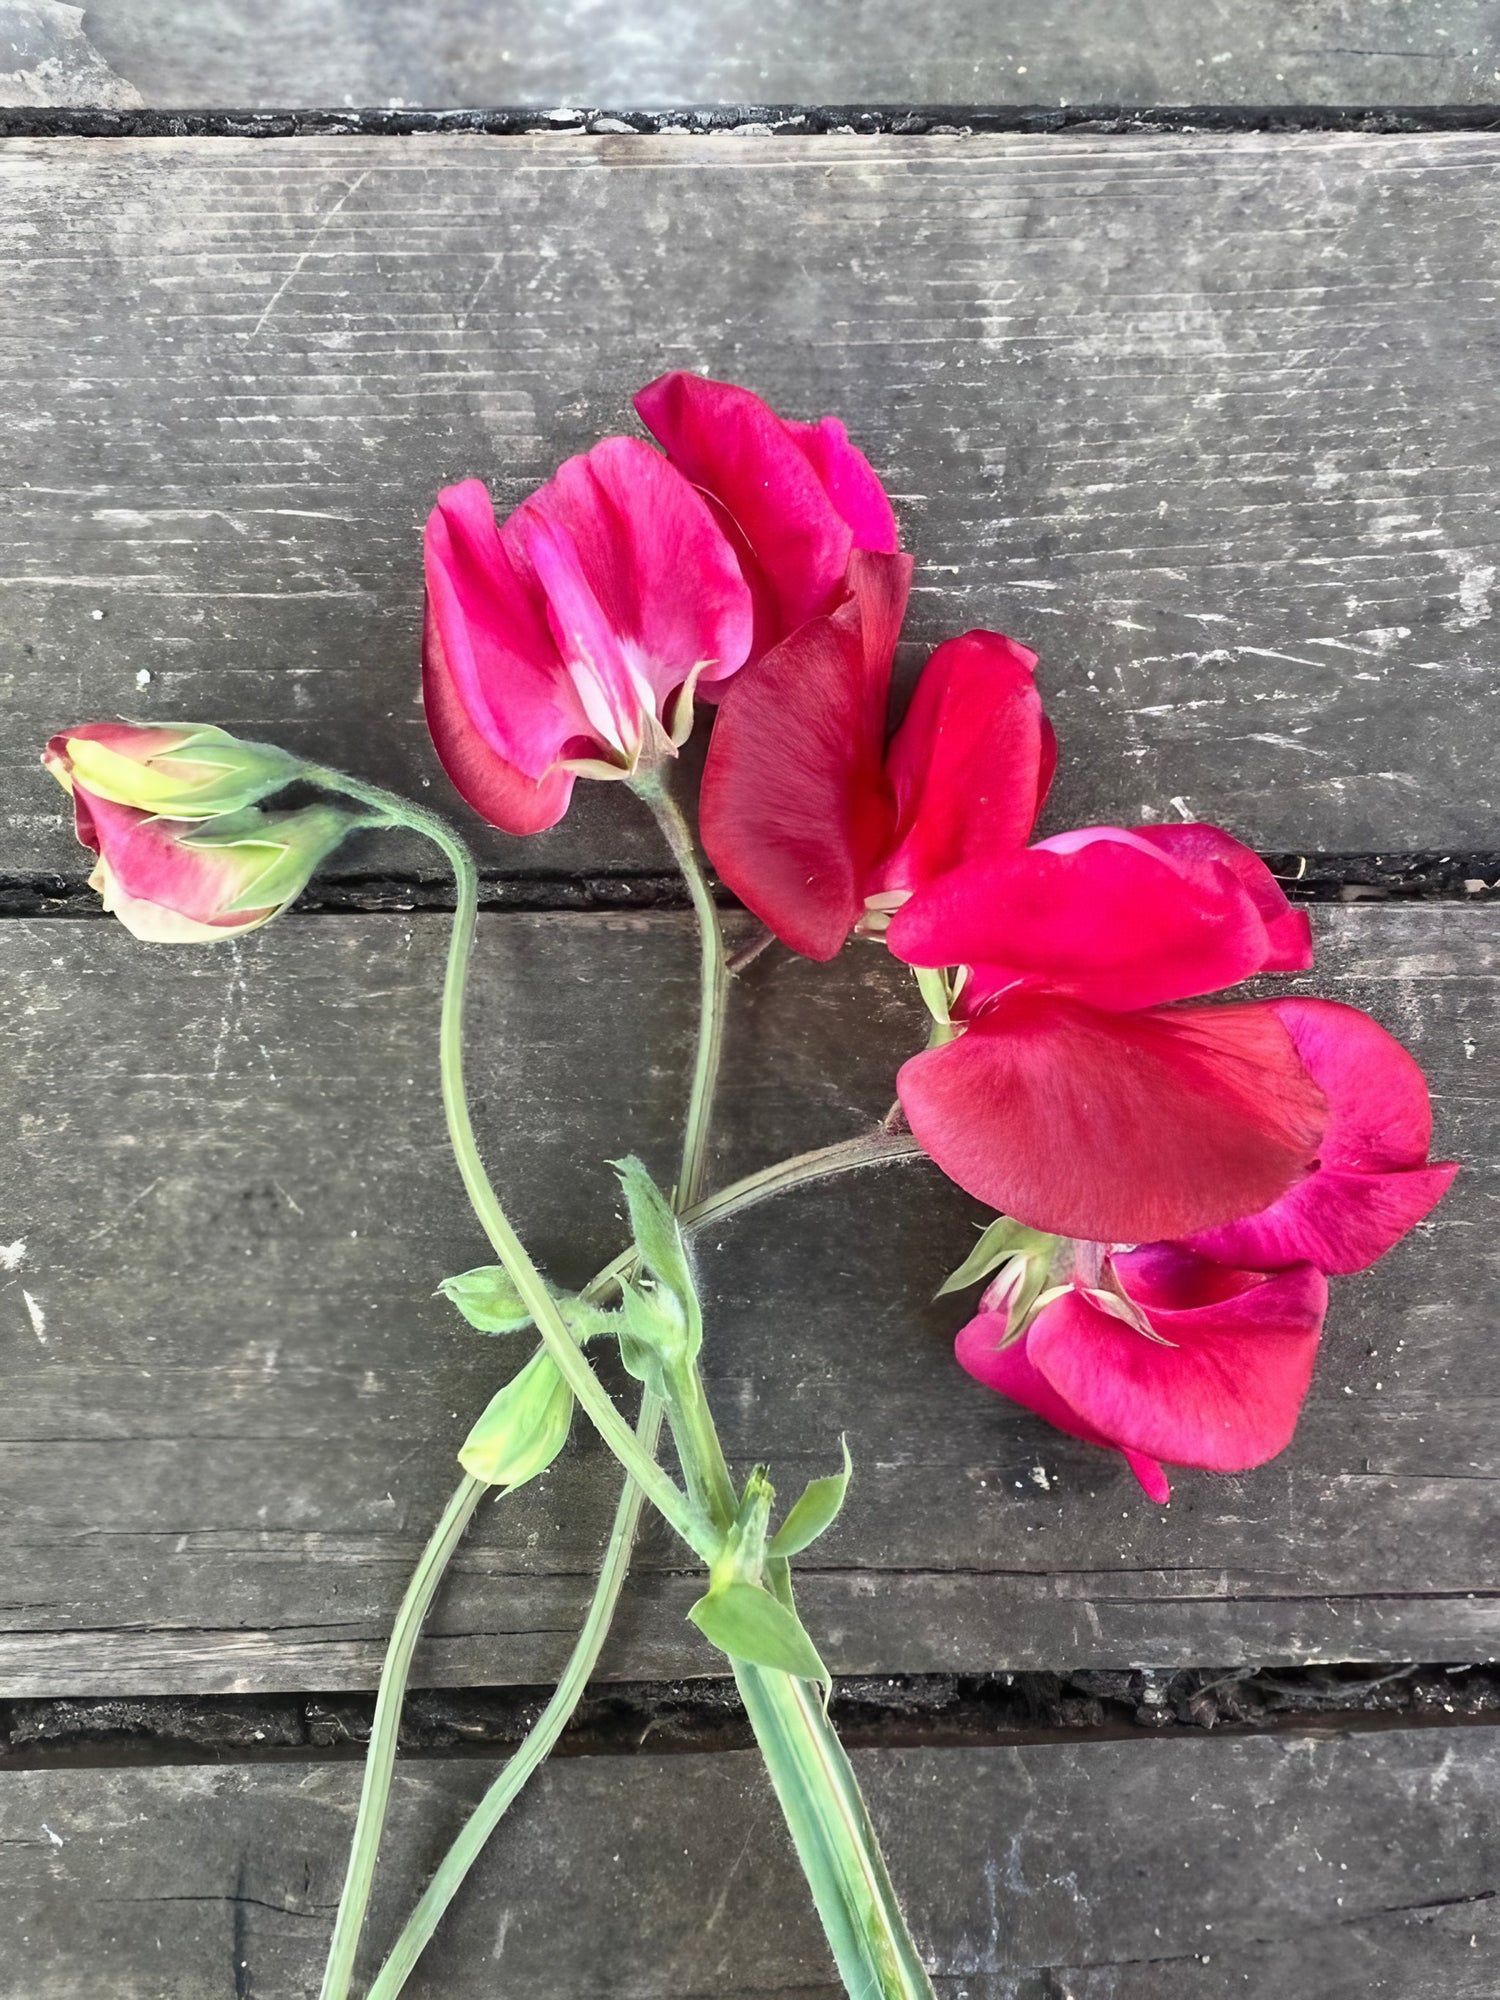 Sweet Pea Winston Churchill flowers arranged on a rustic wooden table